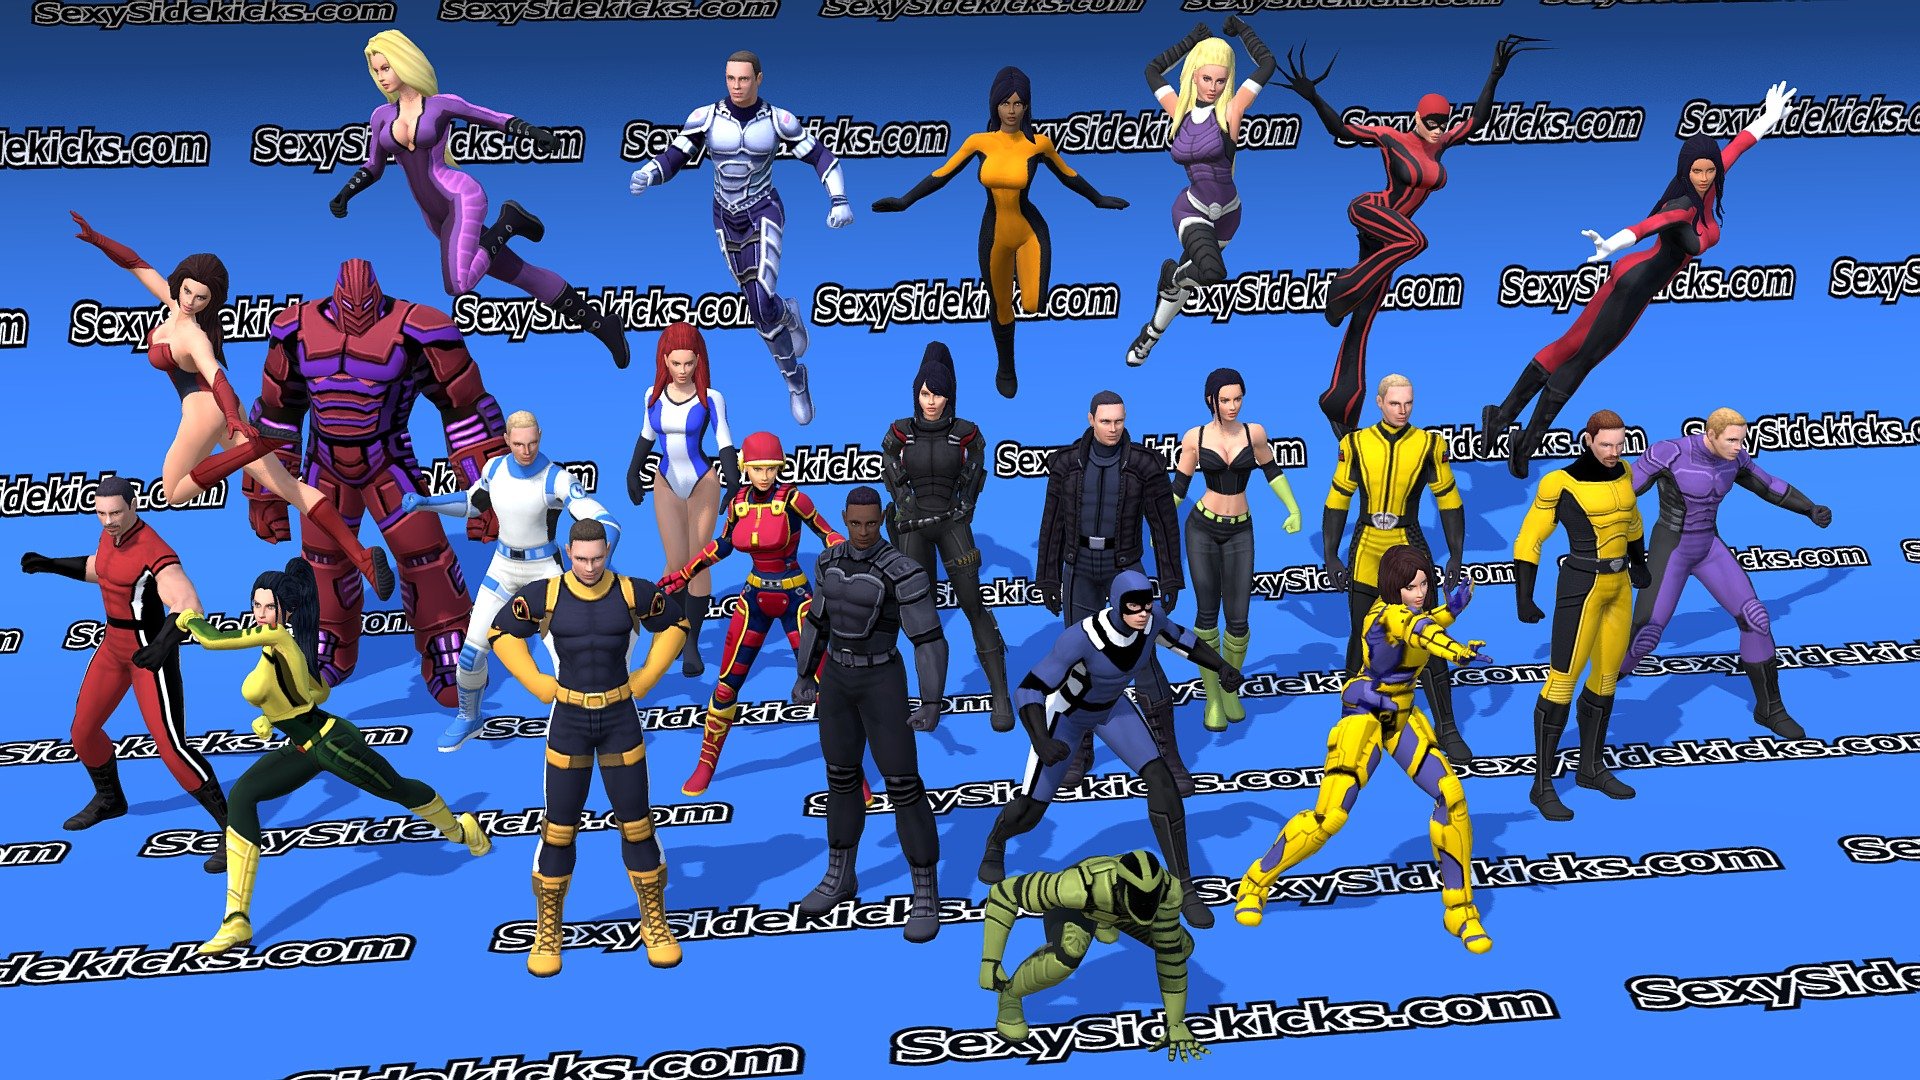 The Superhero Construction Kit includes:
        42 male superhero animations (root motion and non root included)
        42 female superhero animations (root motion and non root included)
        15 male outfits
        20 female outfits
        30 female hairstyles
        20 male hairstyles
        PSD layers for changing haircolor, eye color, faces, skin color
        PSD layers for outfits, so you can mix and match
        a complete Unity 5.1.3 project with playable characters
        Check out the animation previews https://skfb.ly/6y8UU and  https://sketchfab.com/models/7cd6d4da2f8c4578a6f176057dd4c791 - Super Hero Construction Kit - Buy Royalty Free 3D model by rungy 3d model